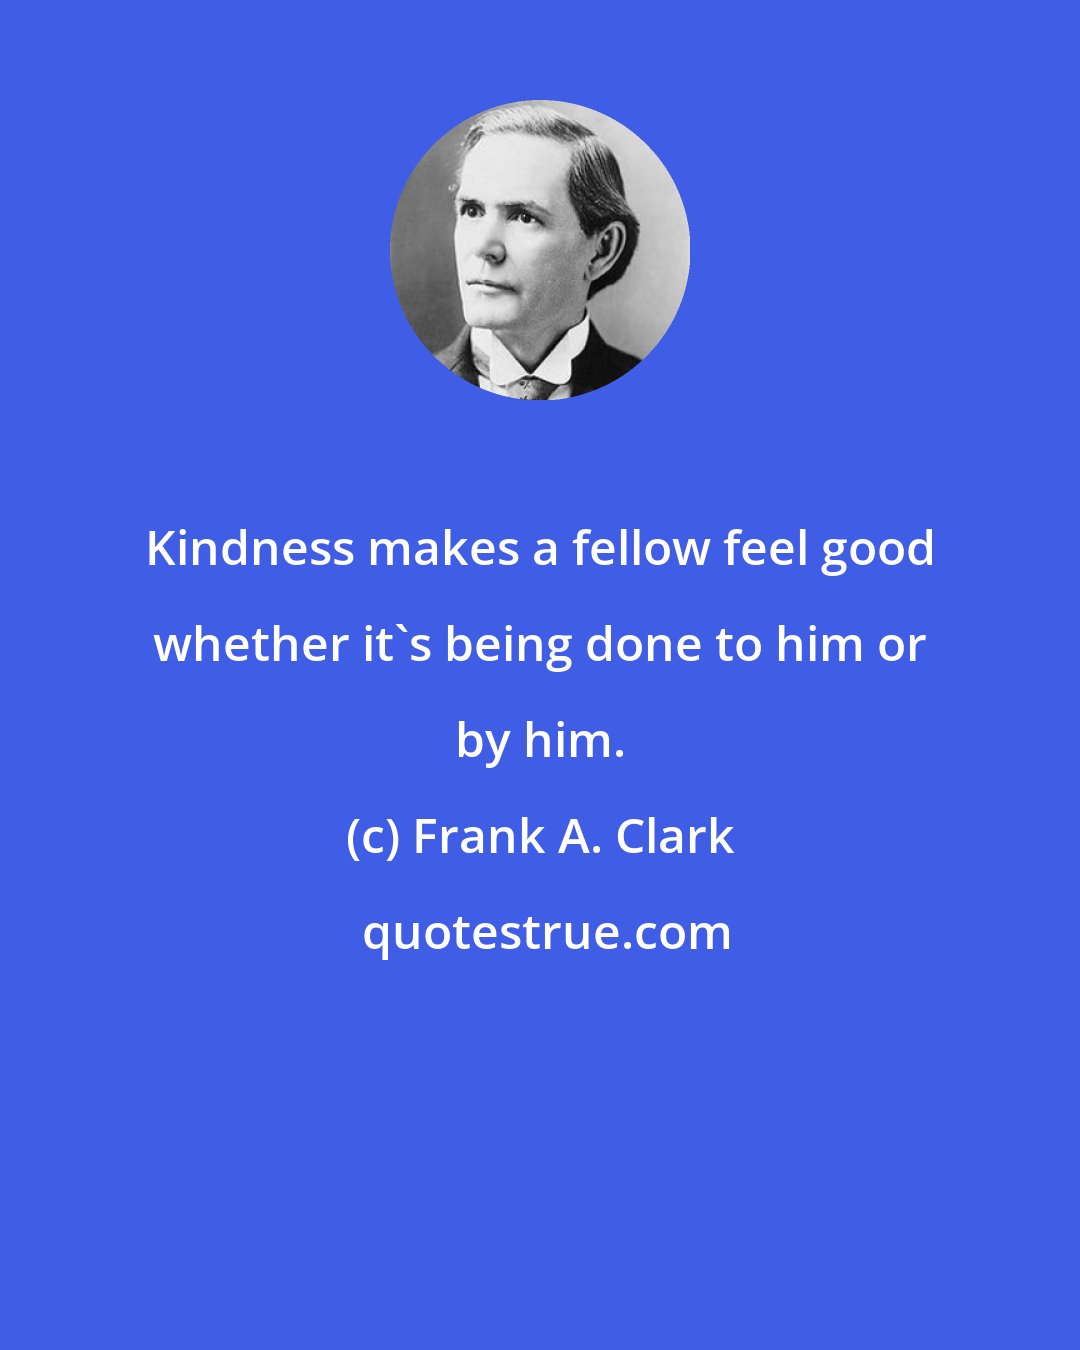 Frank A. Clark: Kindness makes a fellow feel good whether it's being done to him or by him.